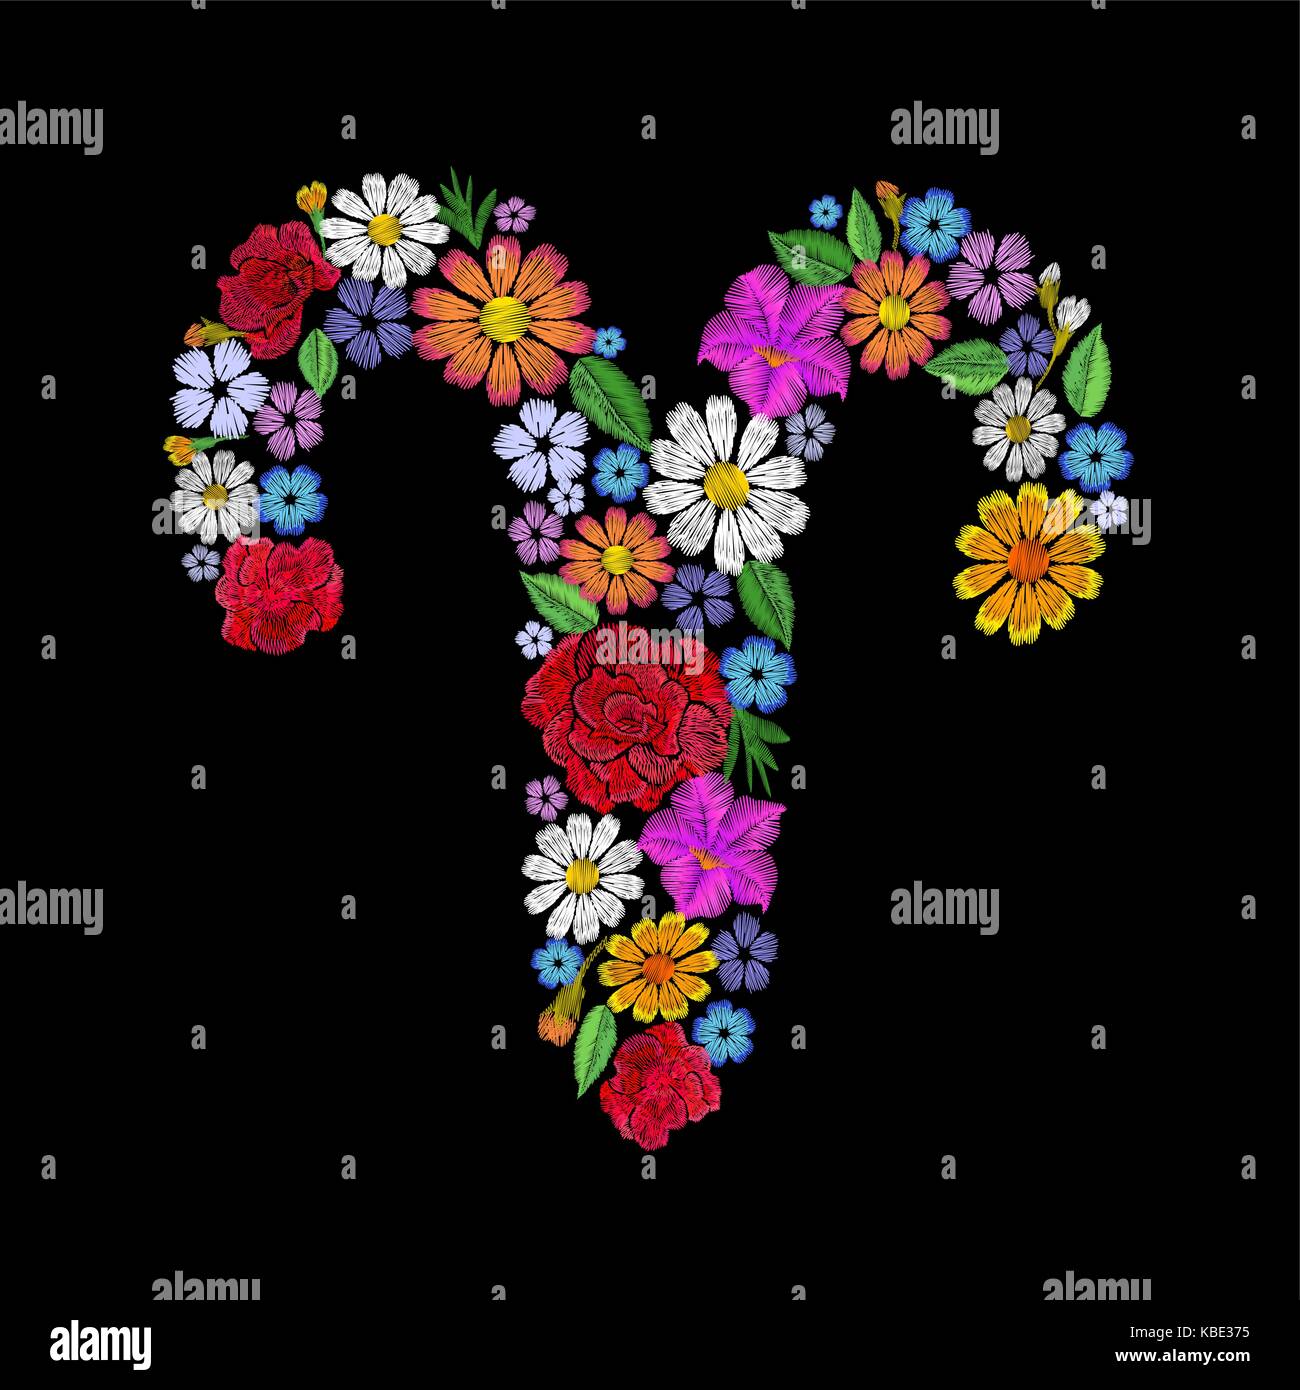 Aries zodiac sign flower arrangement. Horoscope astrology fashion floral embroidery patch design template. Texture stitch effect. Textile print on bla Stock Vector